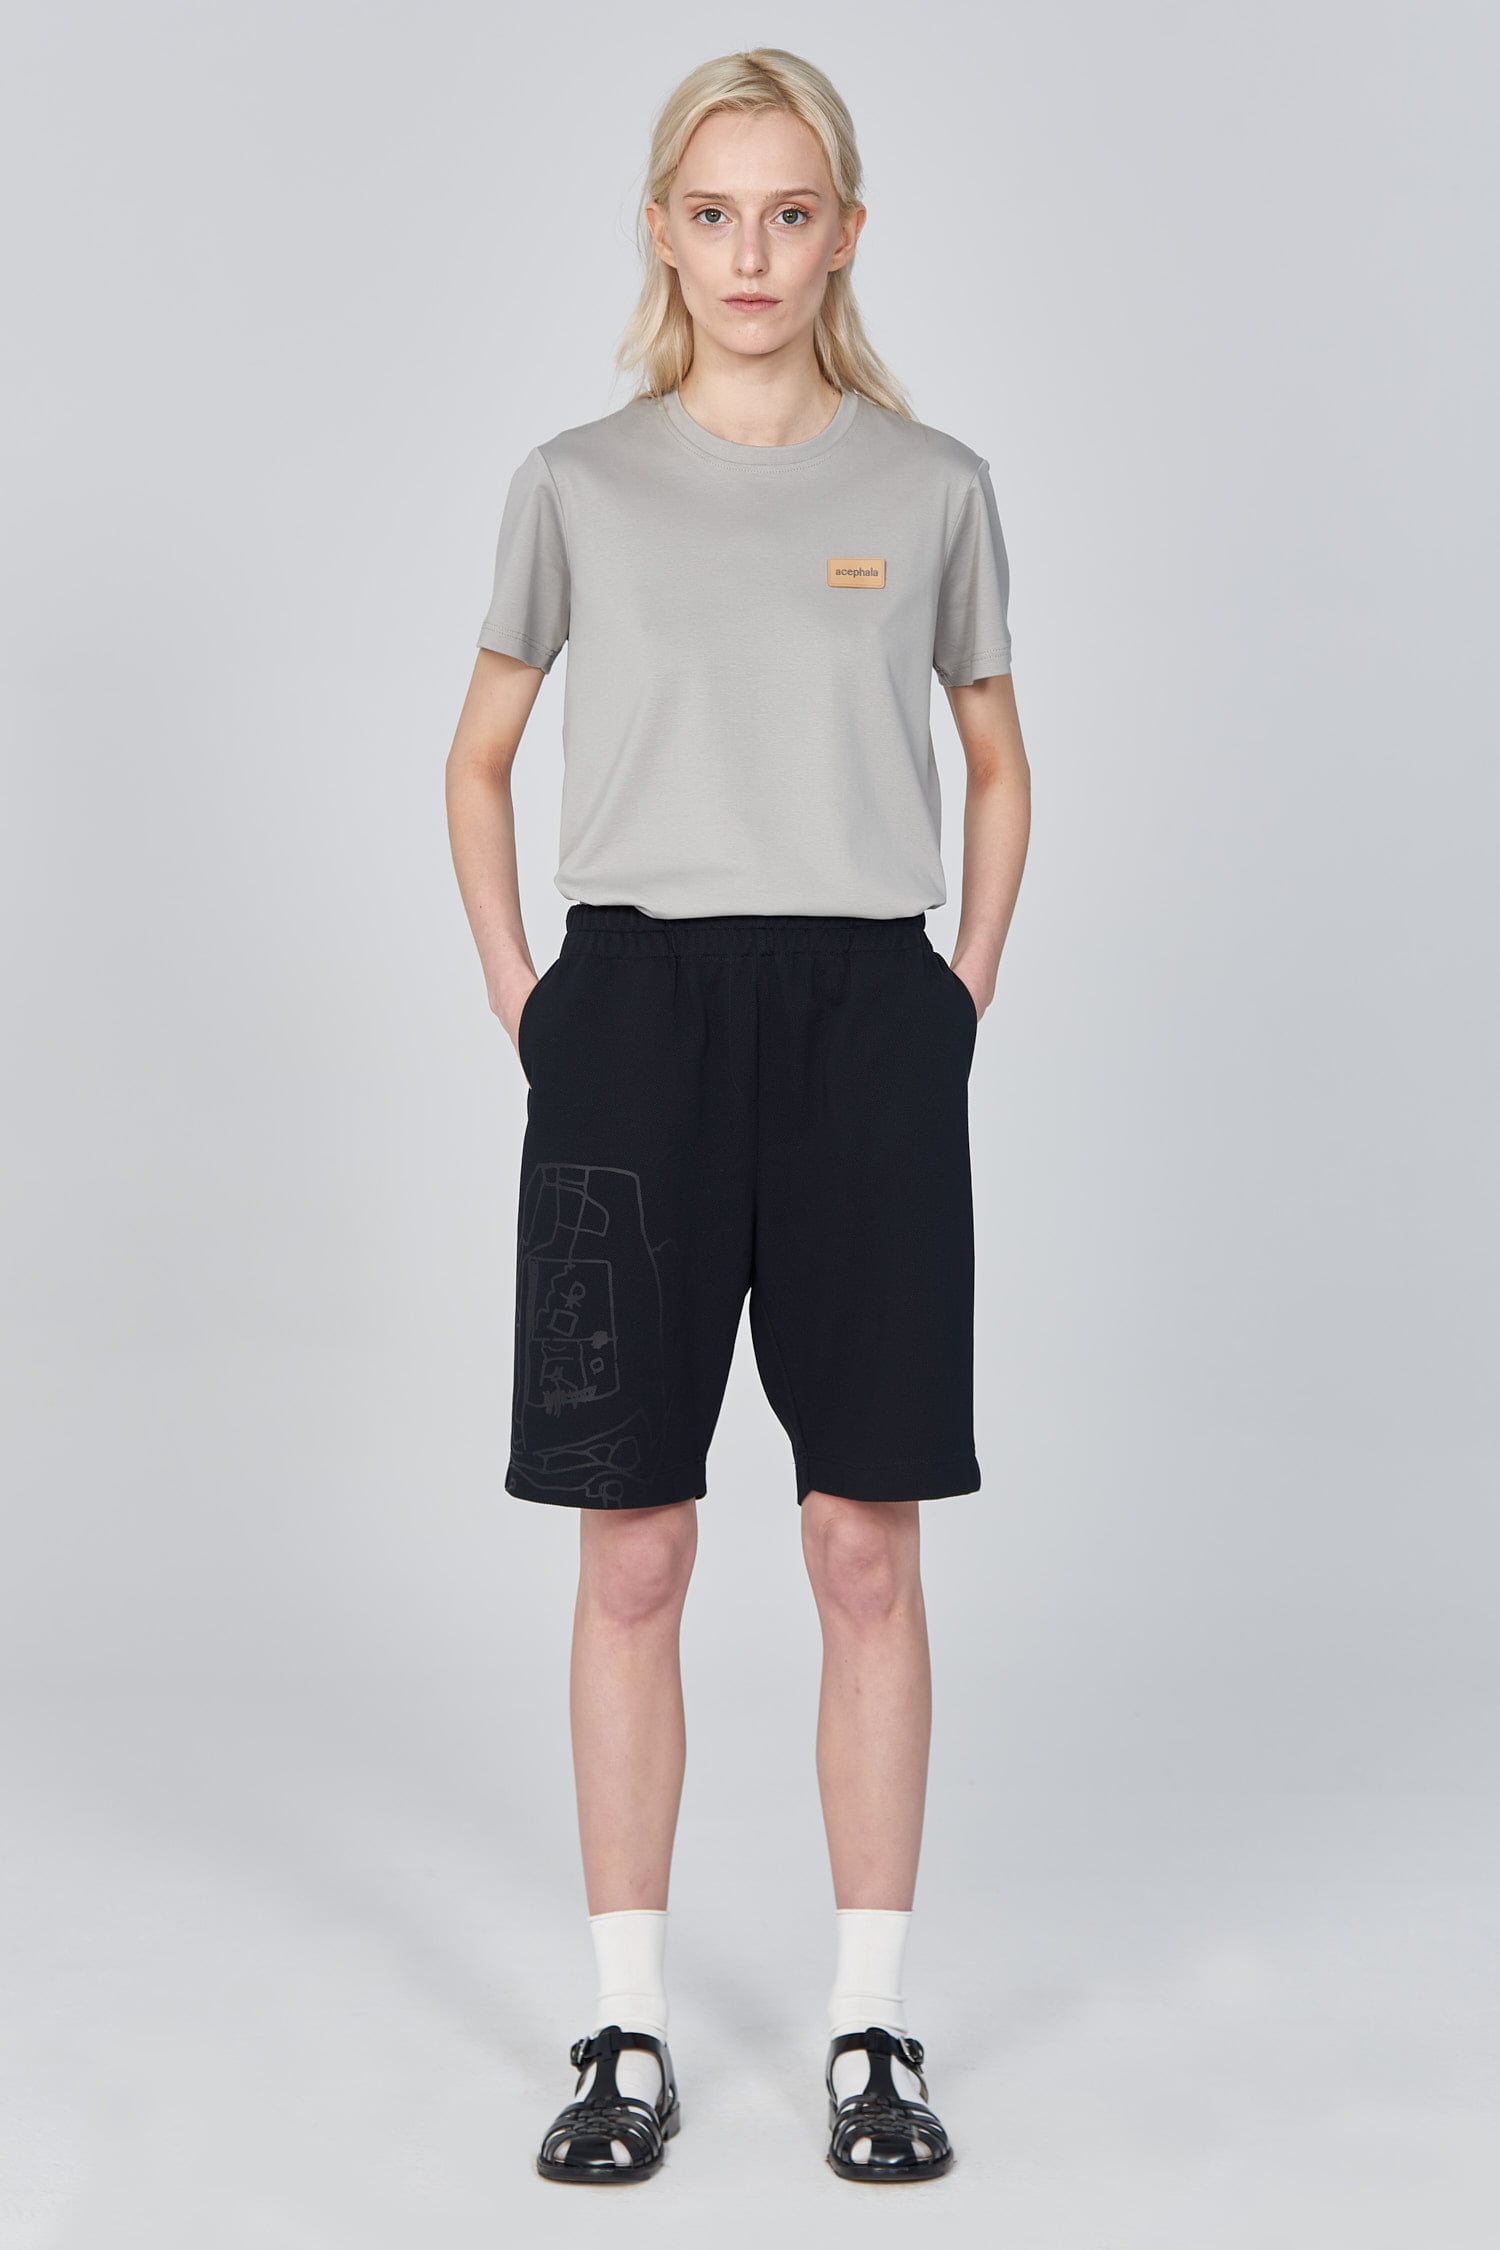 Acephala Ss21 Bermuda Shorts With Graphic Print Front Relaxed